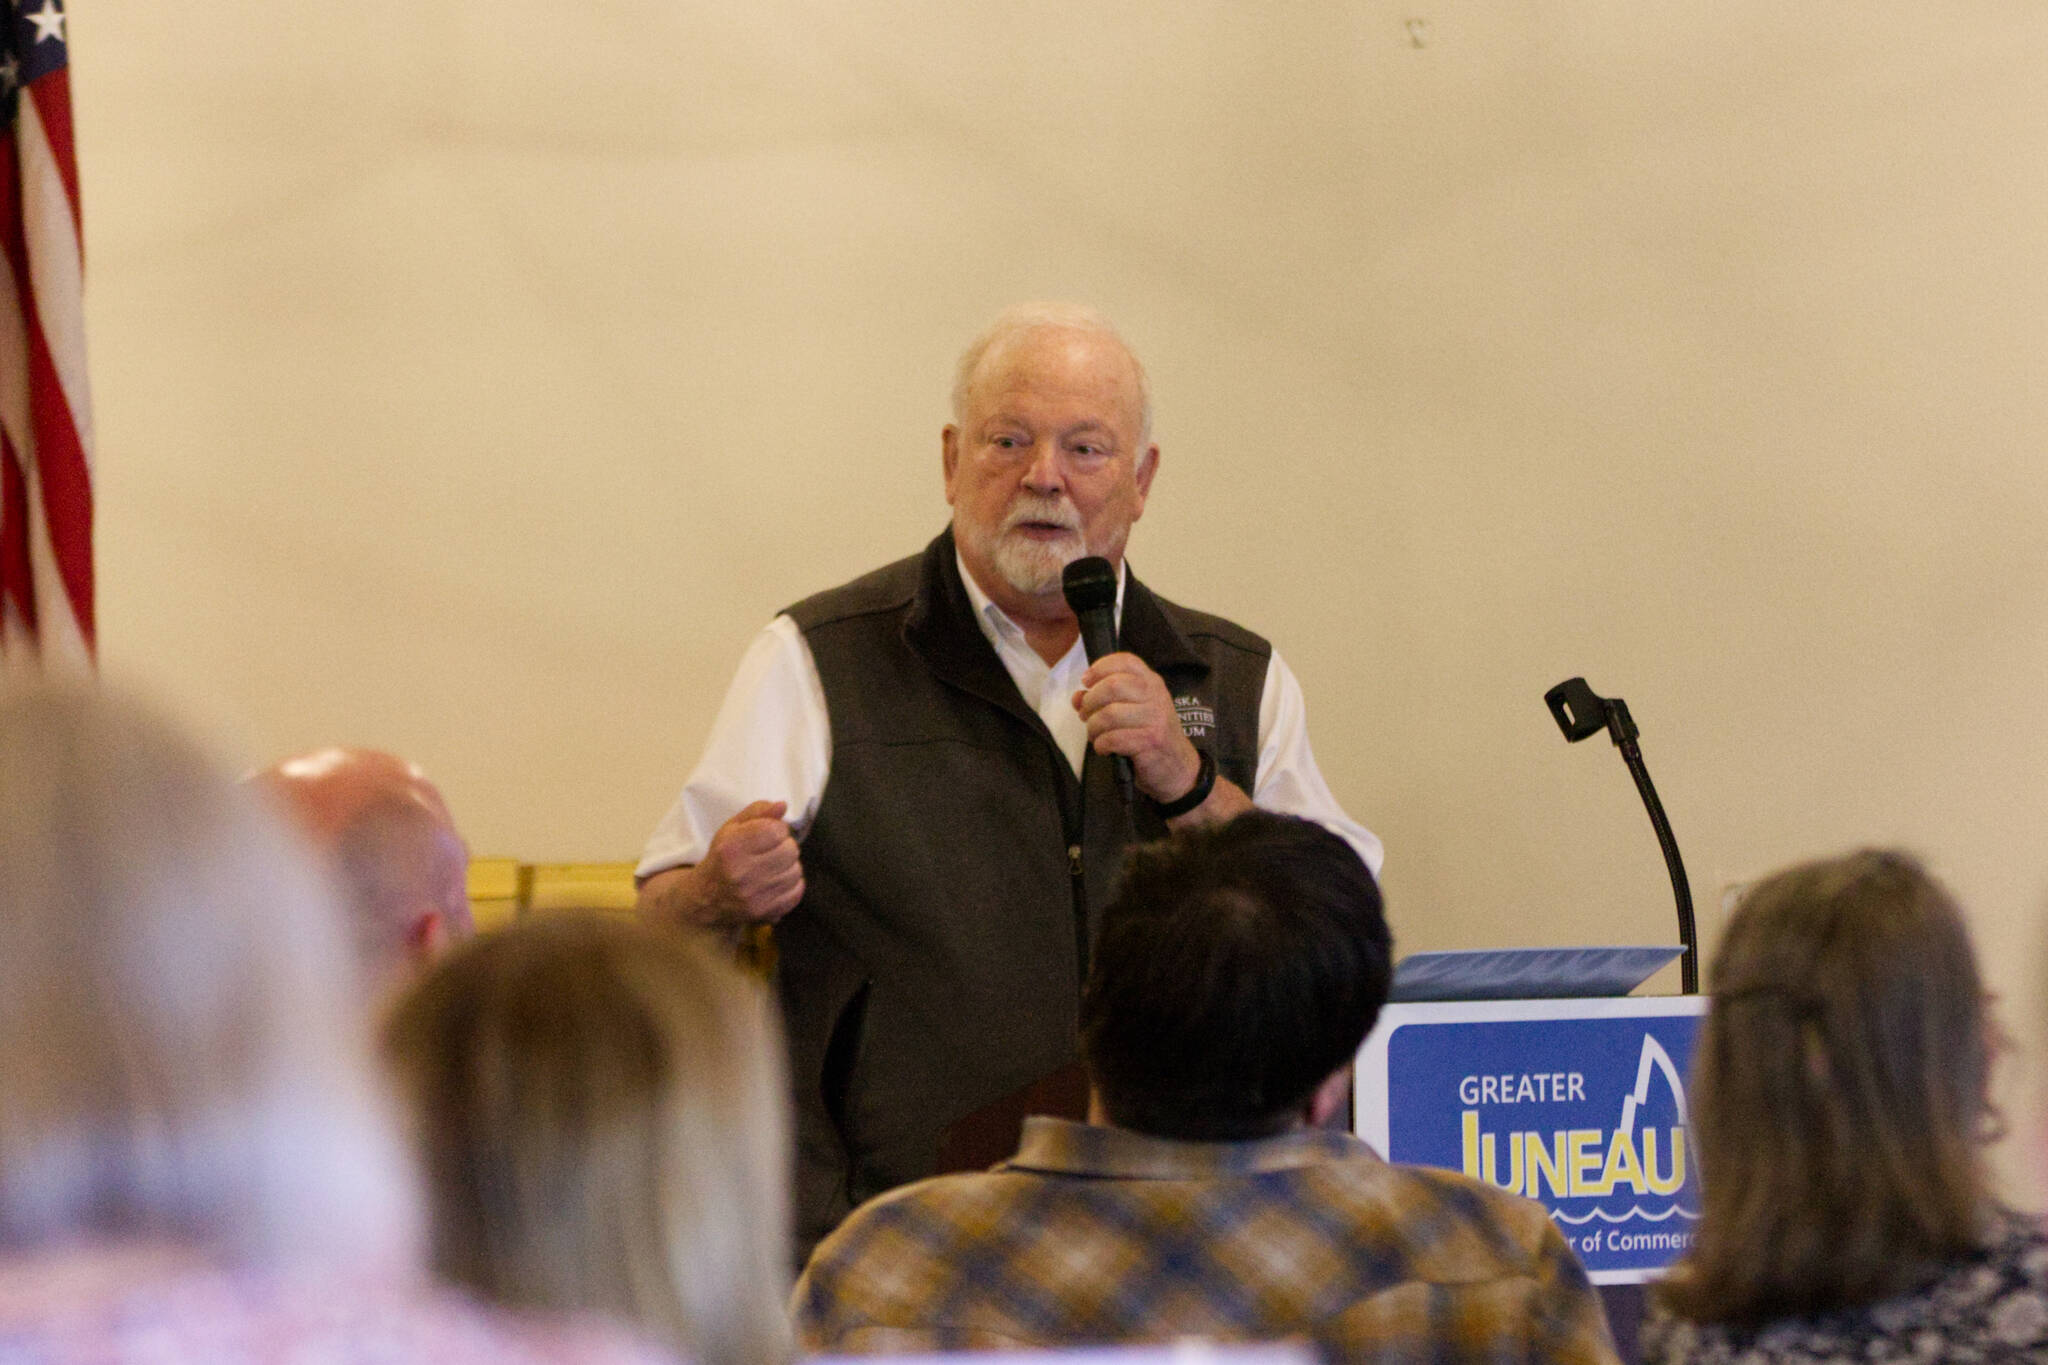 Former Juneau Mayor Bruce Botelho spoke about rank choice voting at the Chamber of Commerce's weekly luncheon. (Clarise Larson / Juneau Empire)